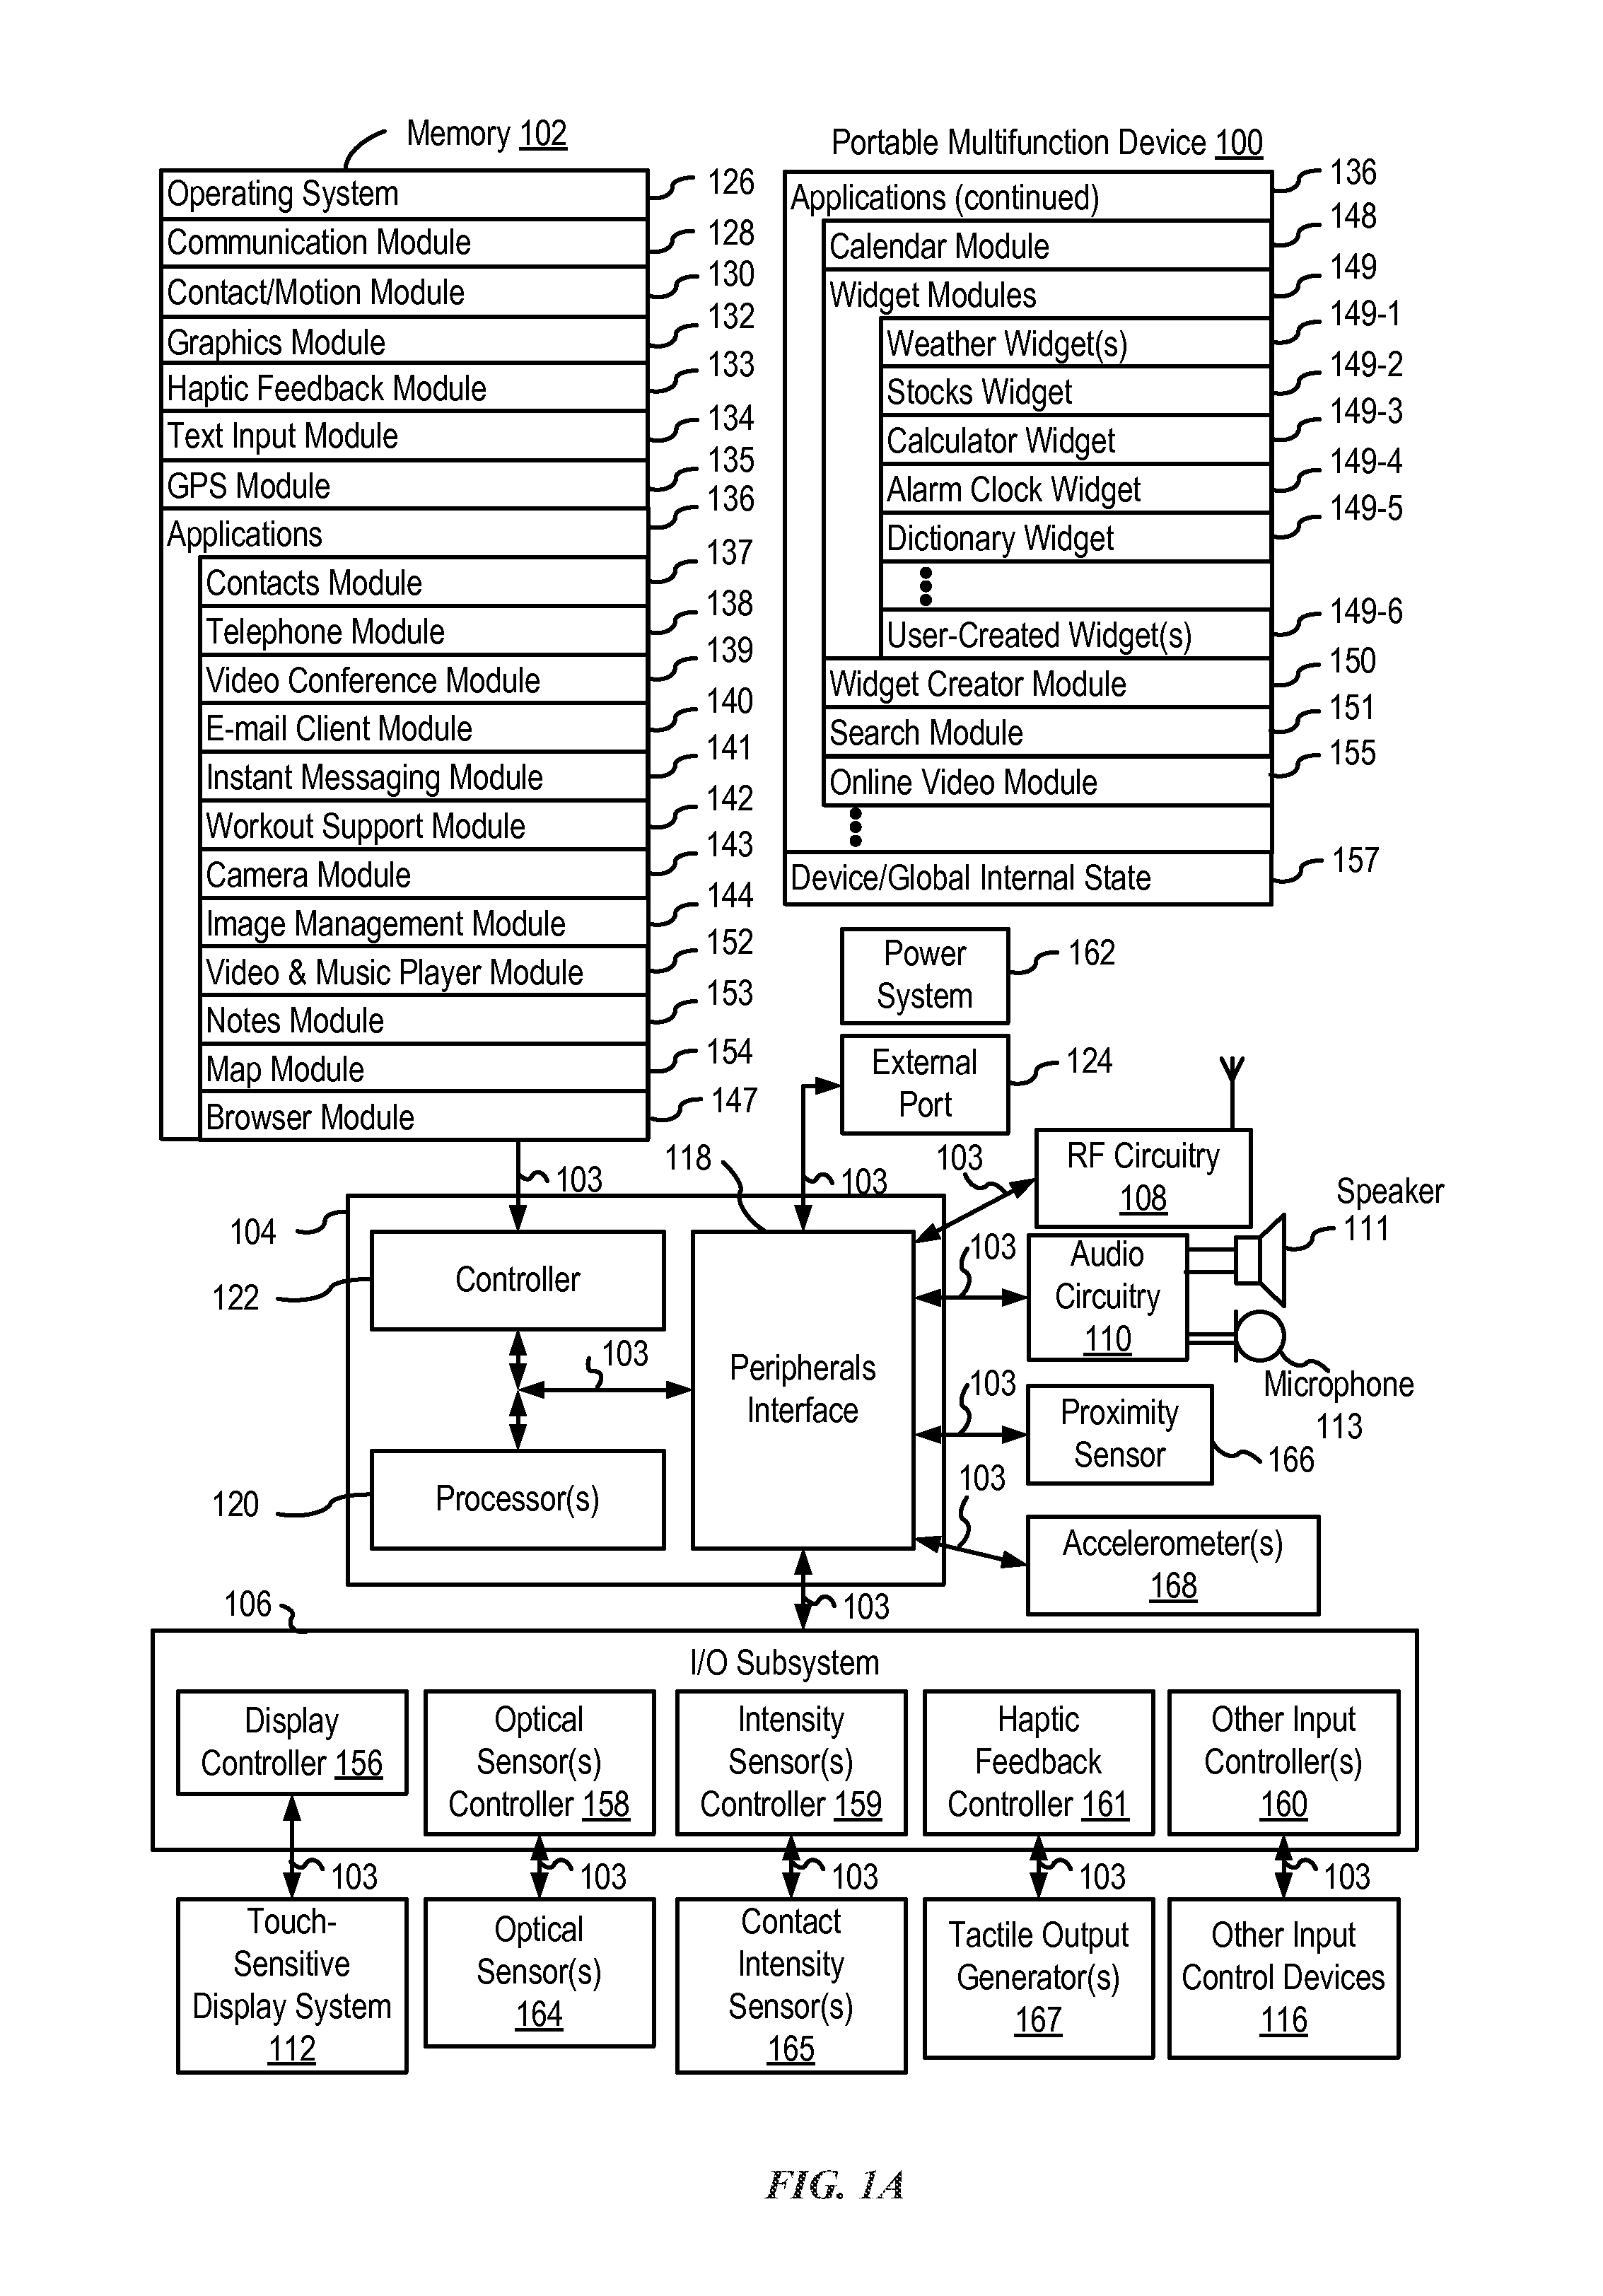 User interface for loyalty accounts and private label accounts for a wearable device